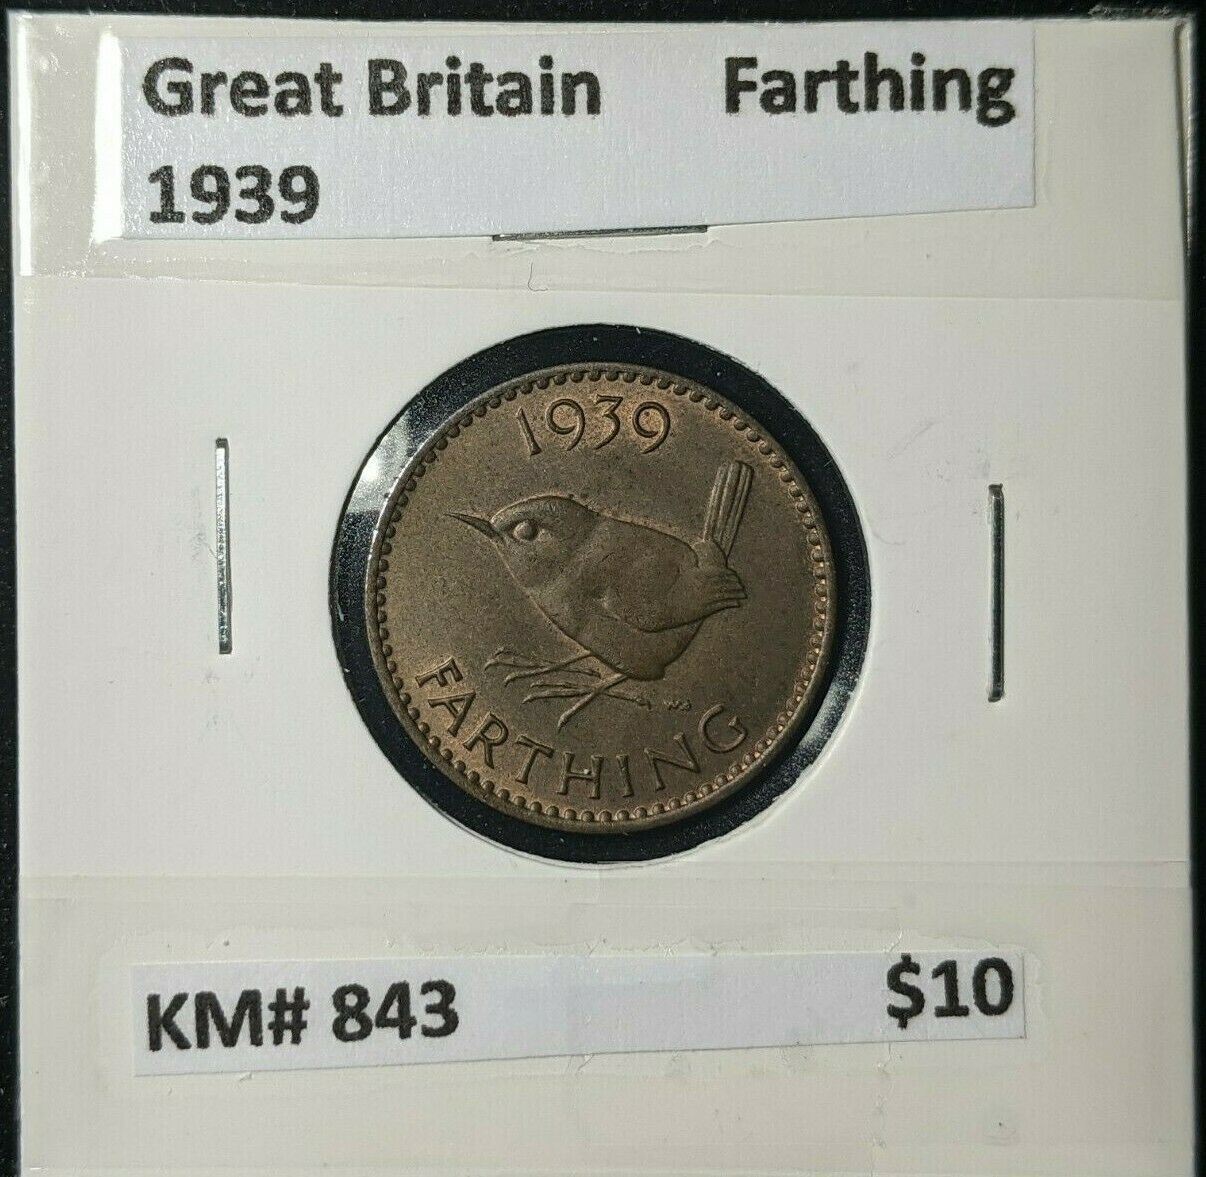 Great Britain 1939 1/4d Farthing KM# 843 #207